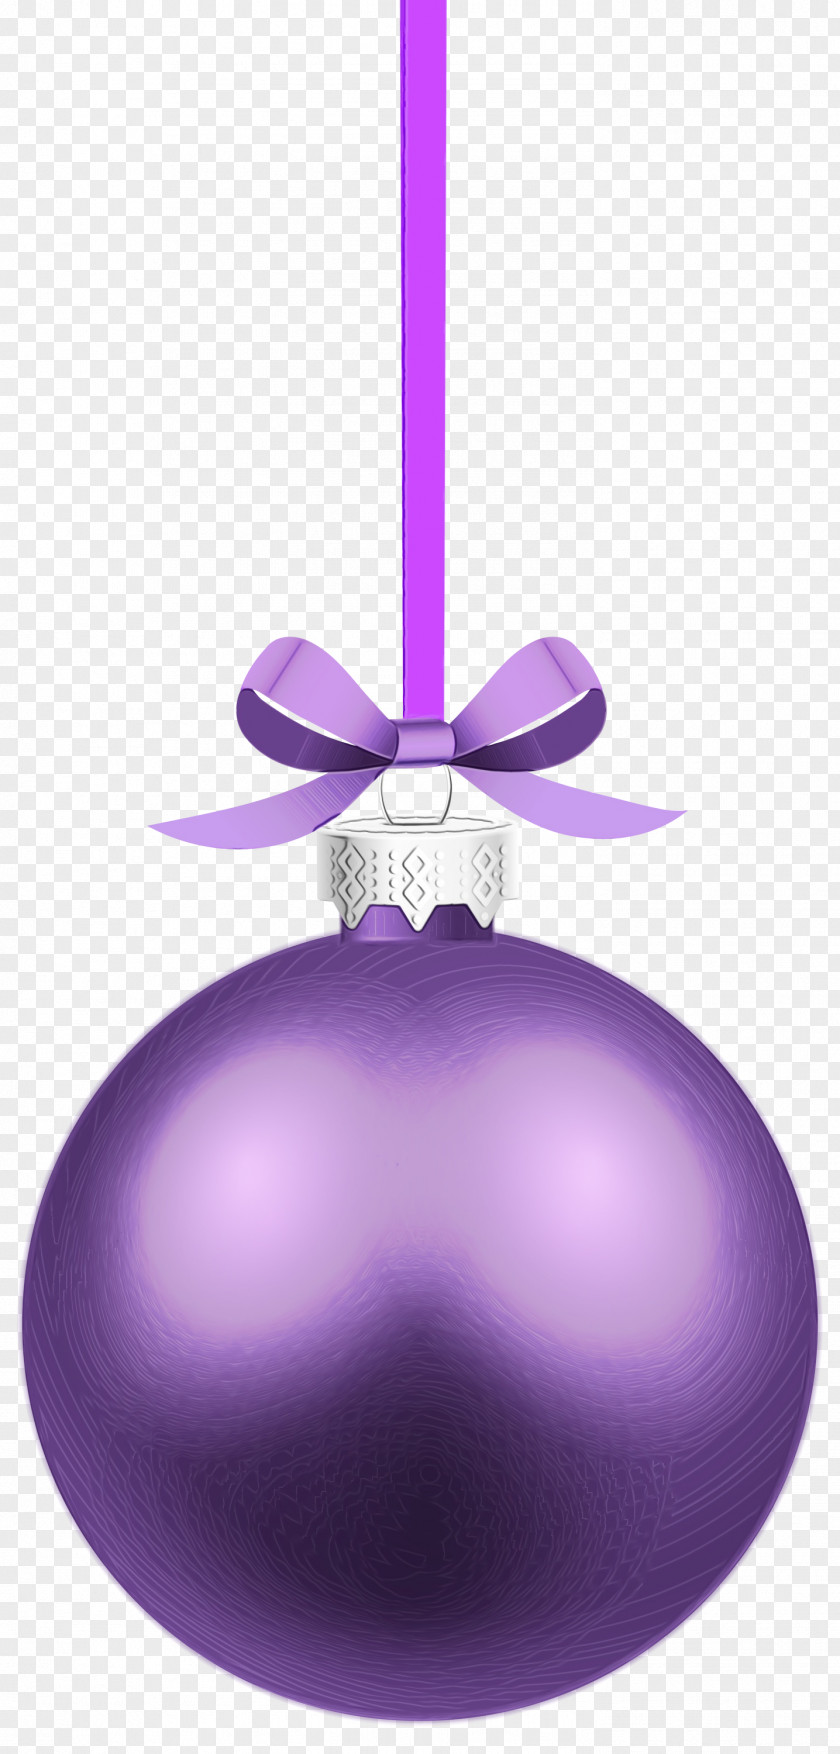 Silver Holiday Ornament Christmas Decoration Cartoon PNG